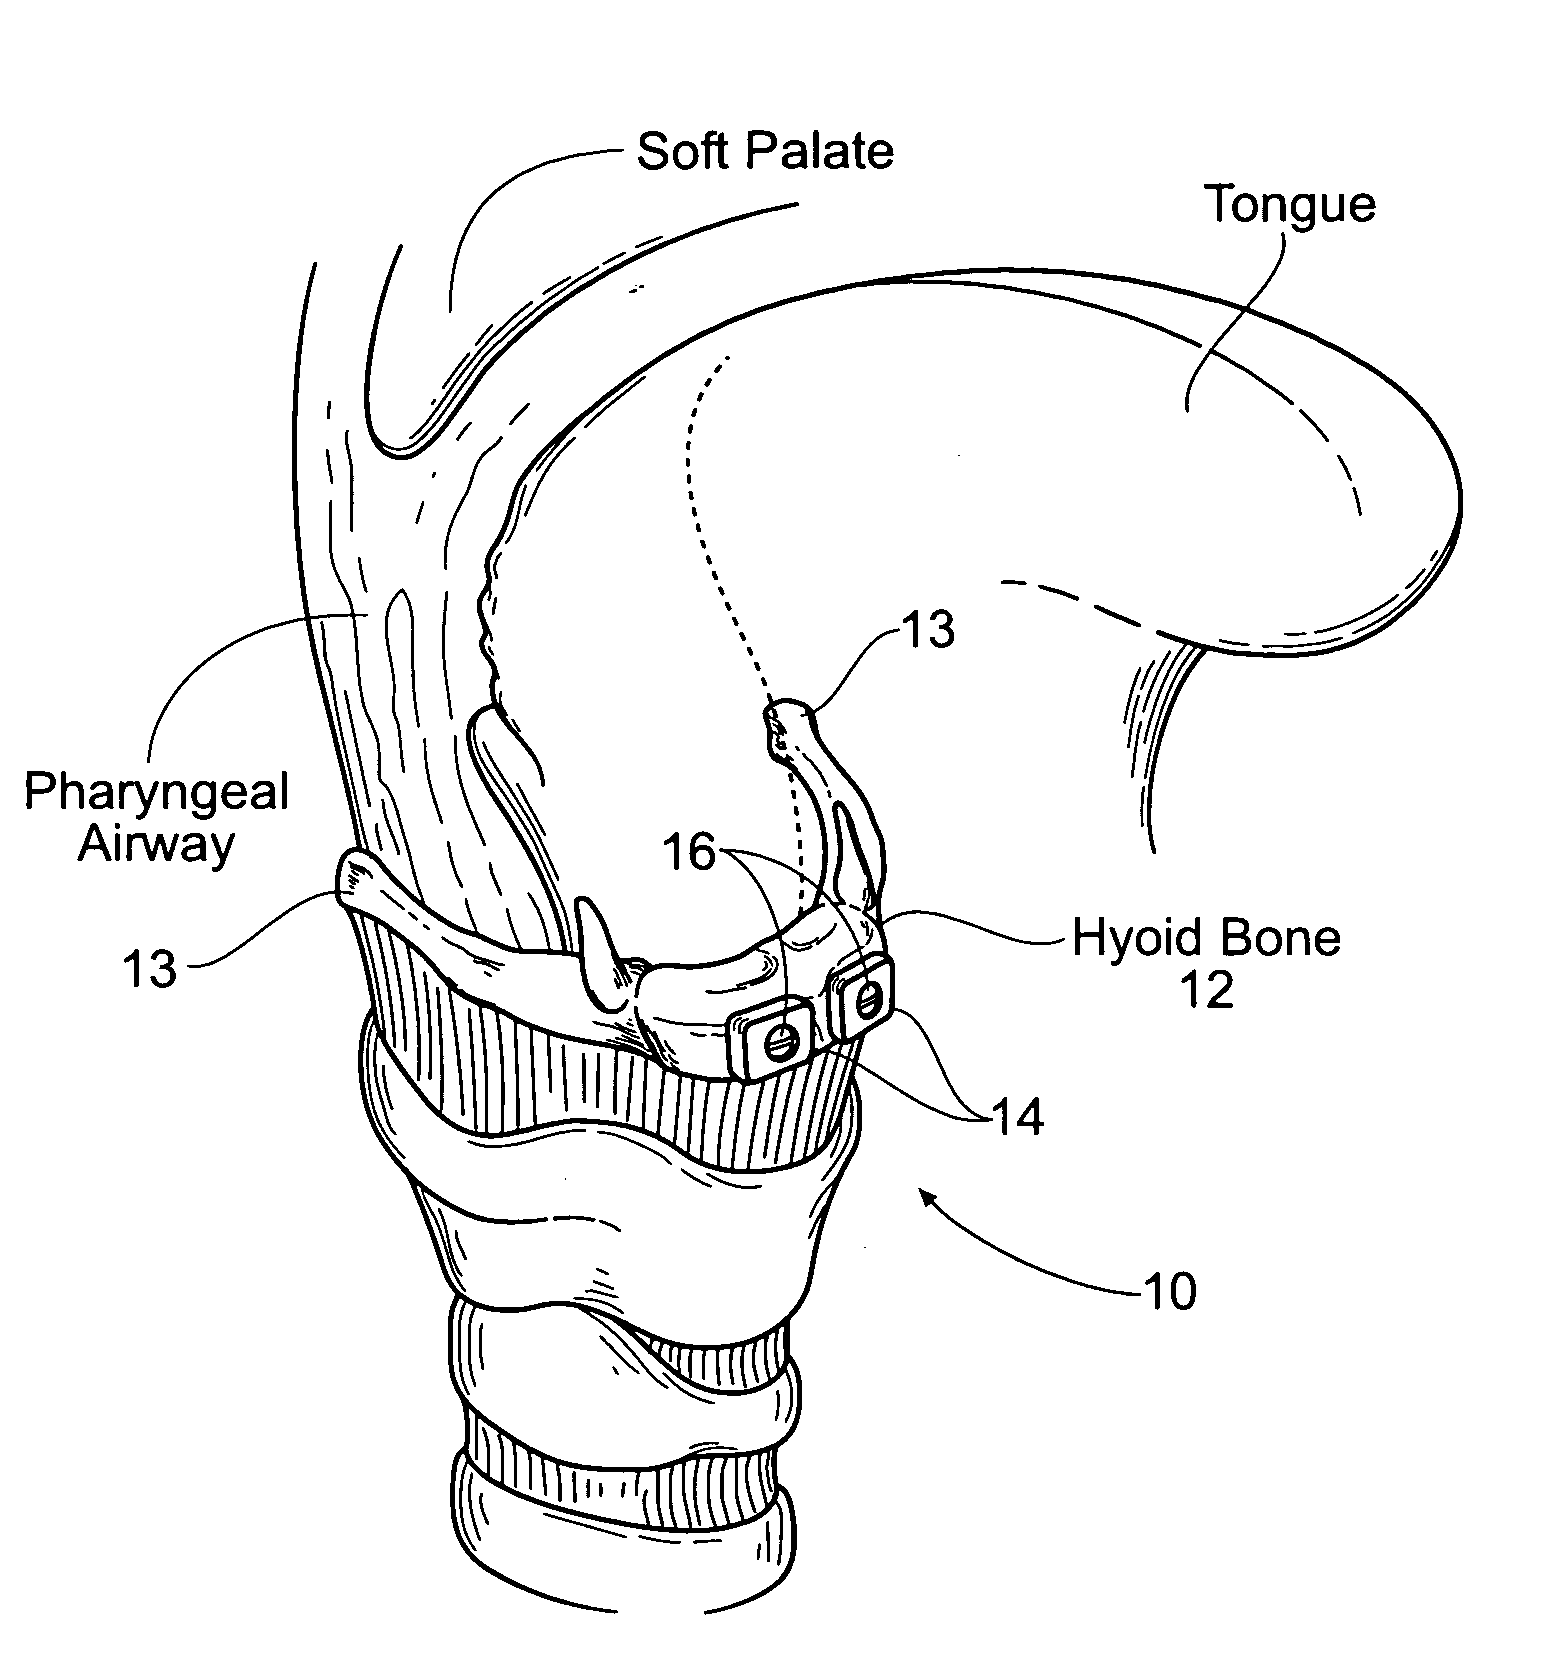 Devices, systems, and methods to move or restrain the hyoid bone